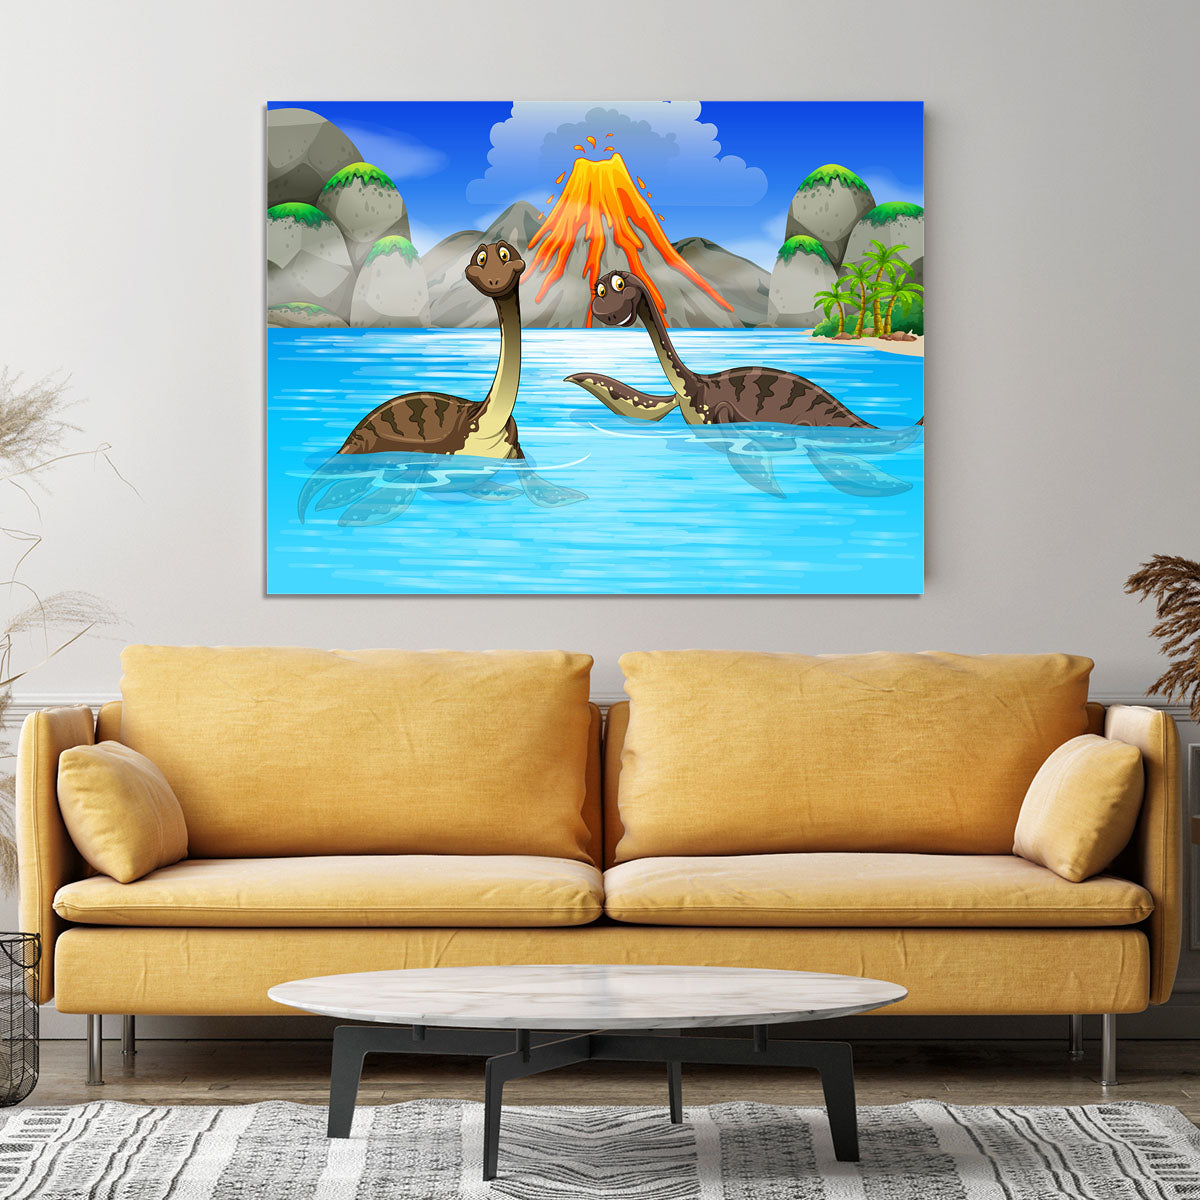 Dinosaurs swimming in the lake Canvas Print or Poster - Canvas Art Rocks - 4